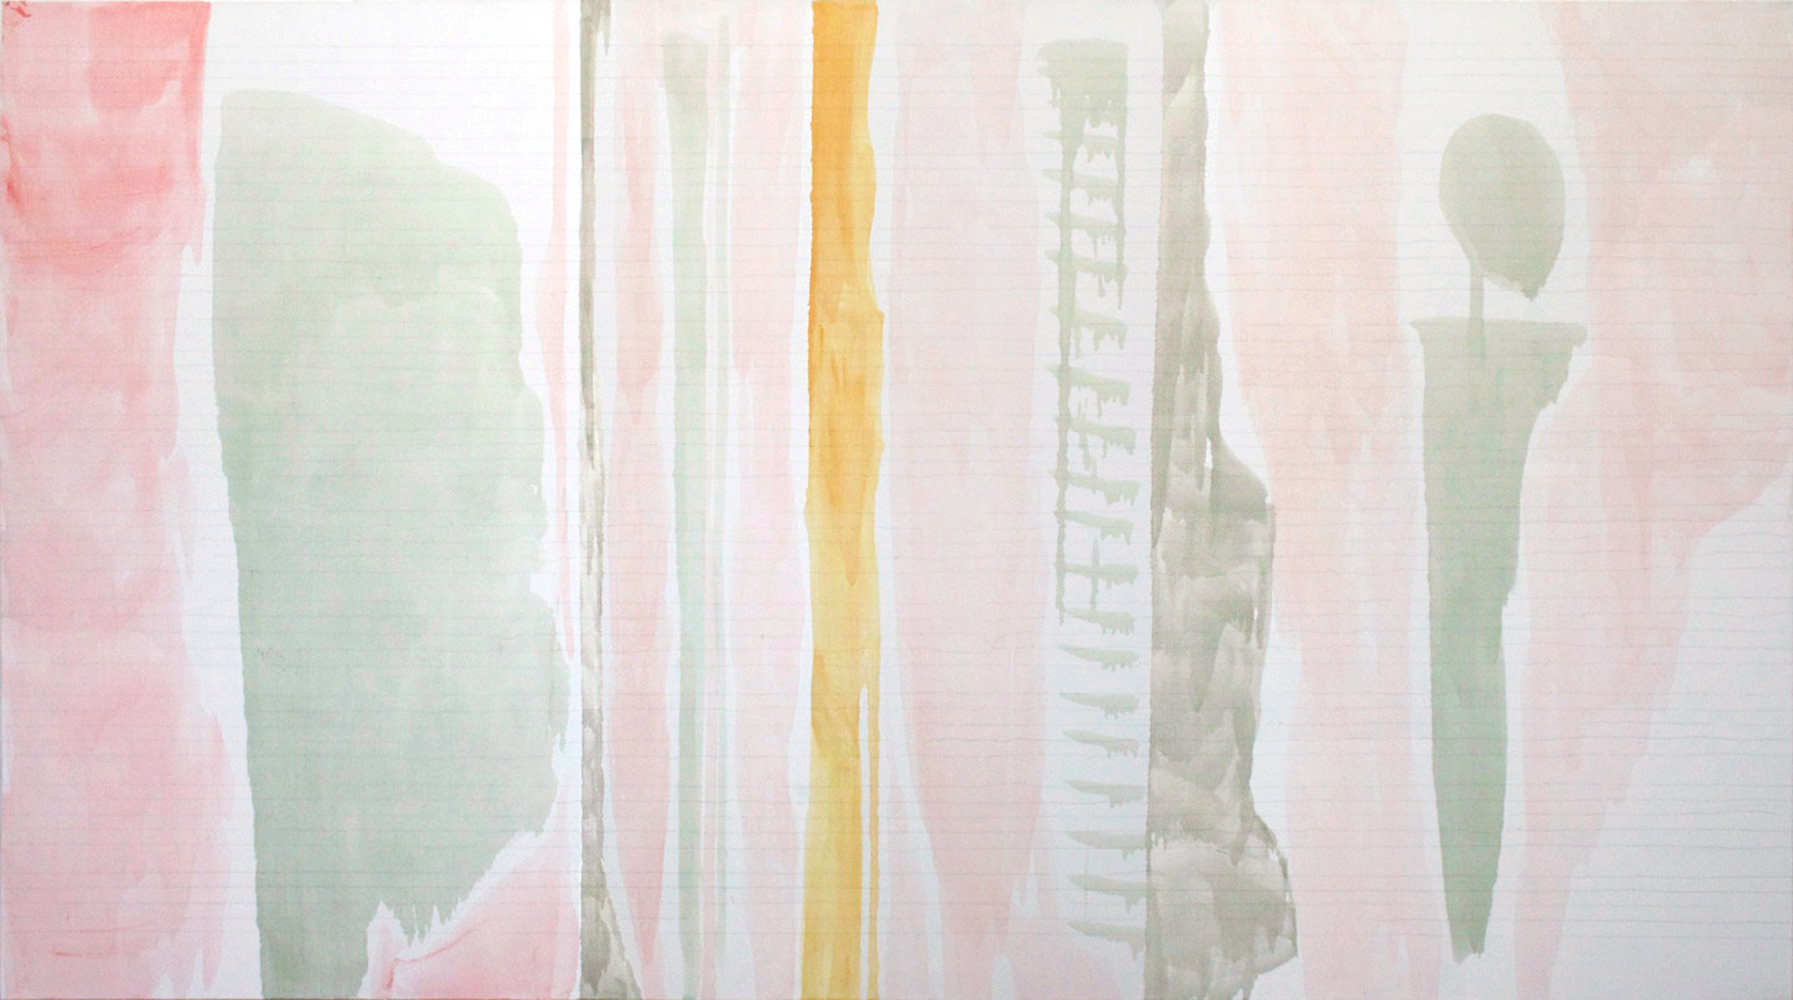   Notation  (2014) oil and graphite pencil on canvas 72" x 120" 